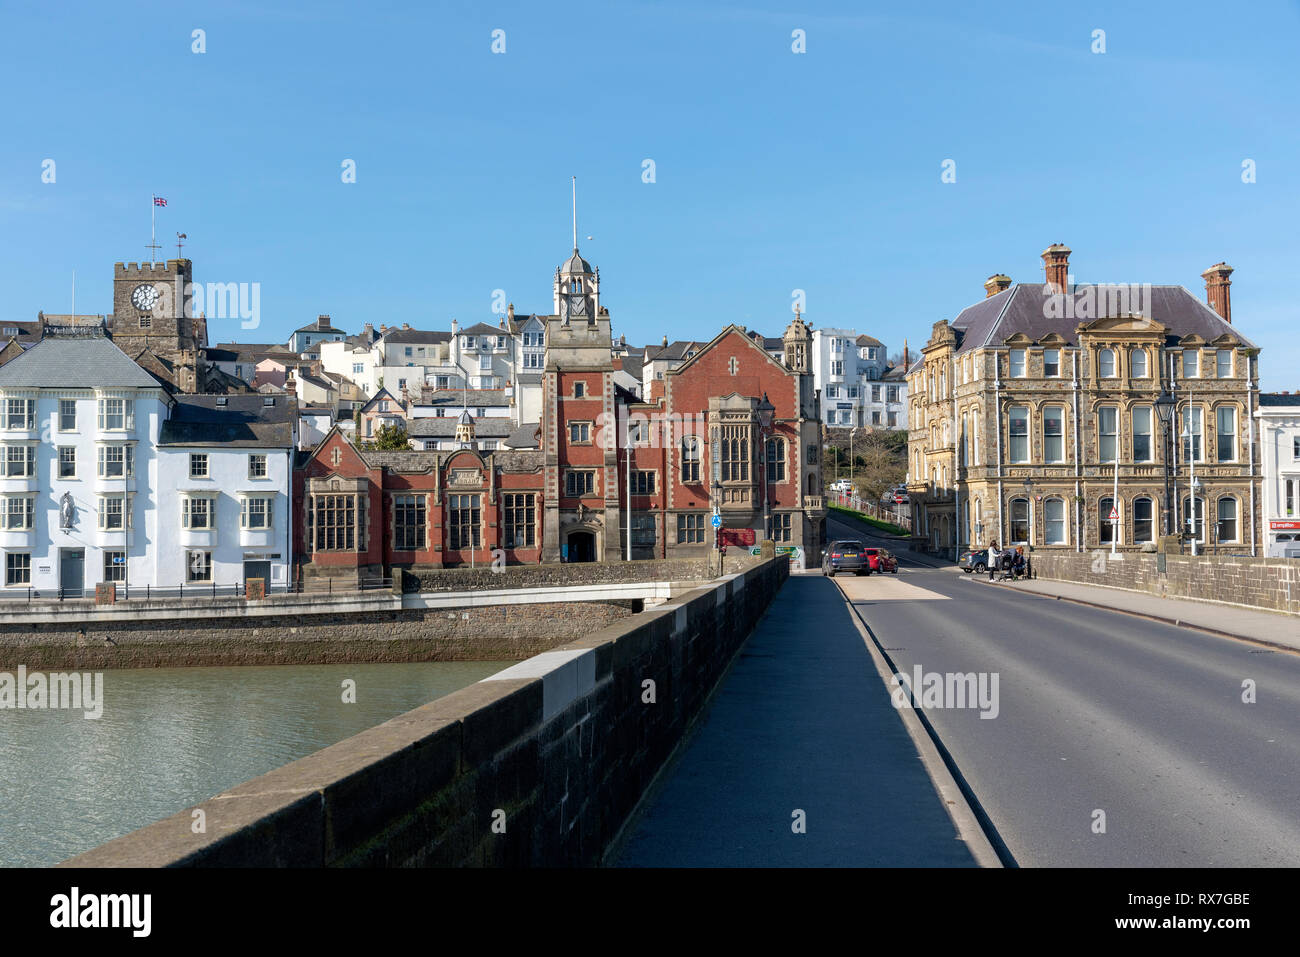 Bideford, North Devon, England UK. March 2019. Bideford town and the Bideford Long bridge built in 1850 viewed from East the Water. Stock Photo